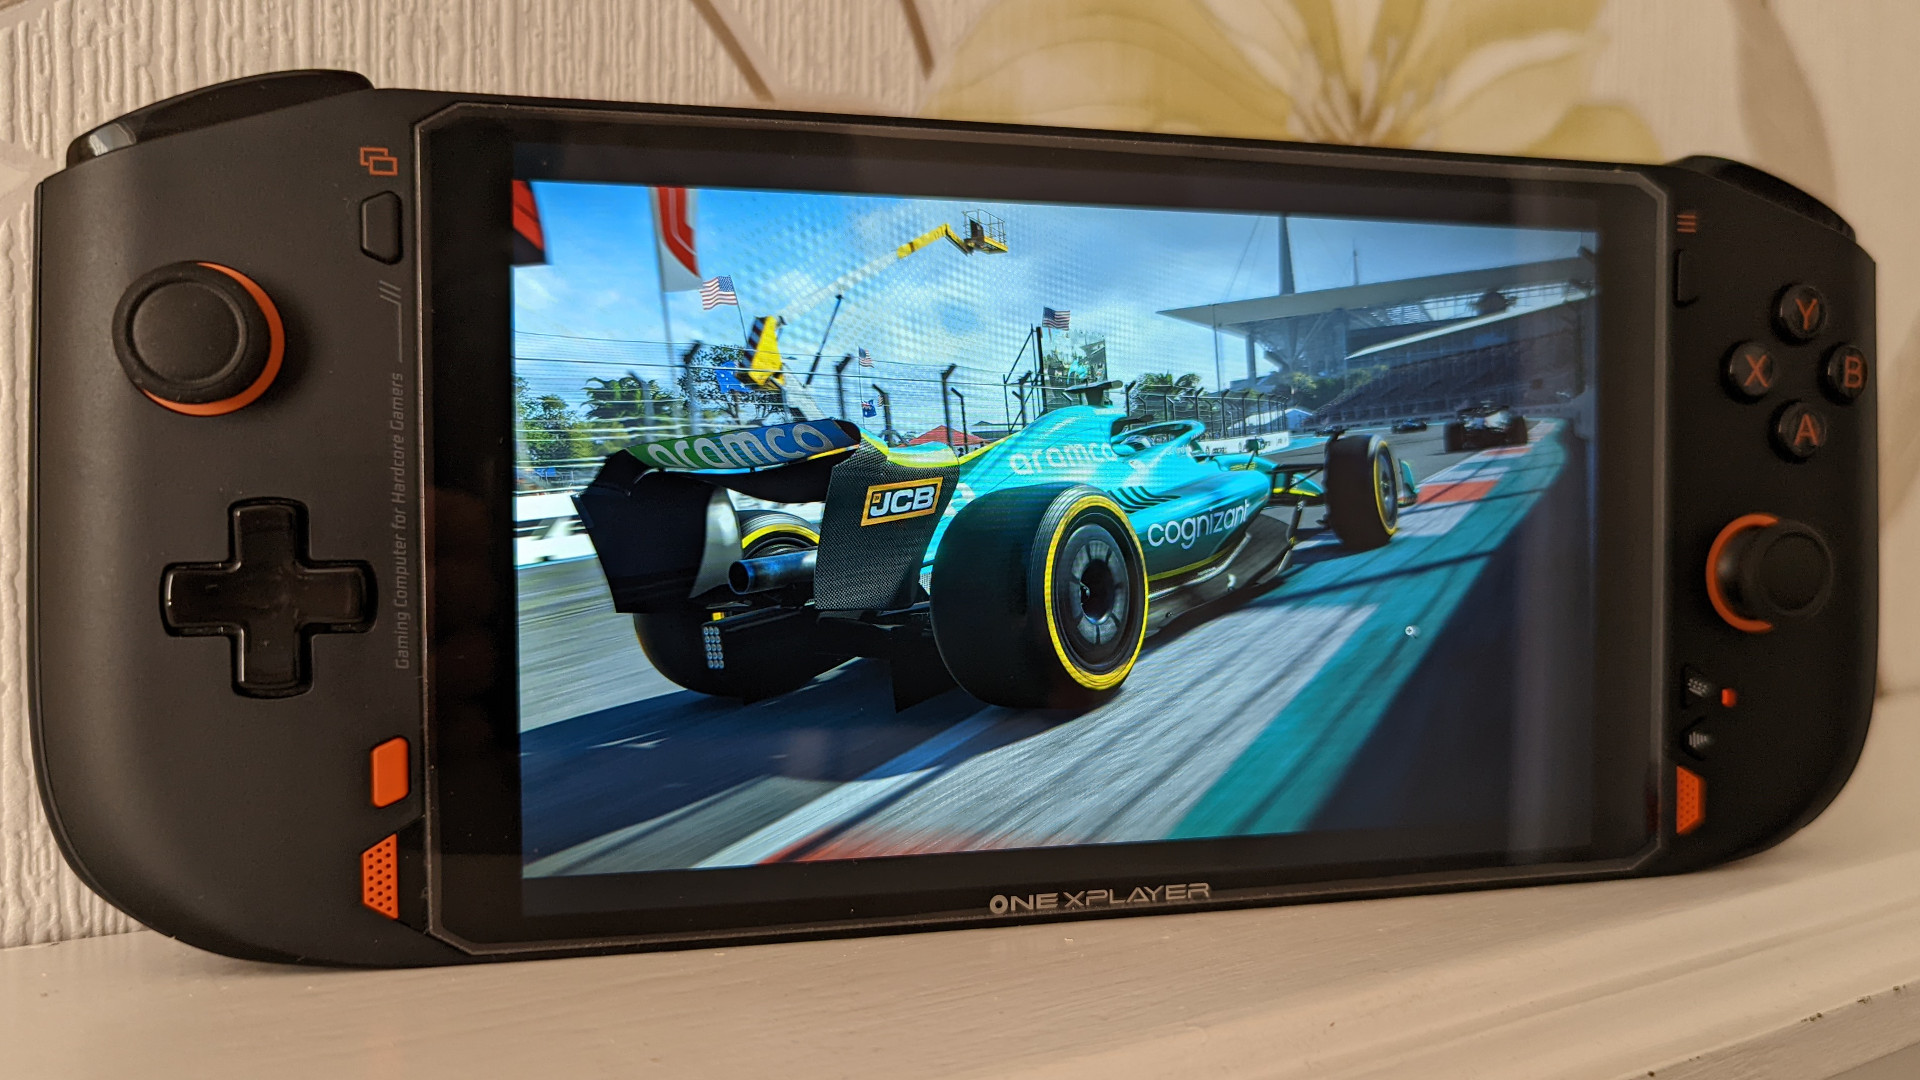 OneXPlayer Mini AMD review: The portable powerhouse sits atop a white surface, with images of a blue F1 car racing down the track showing on its display